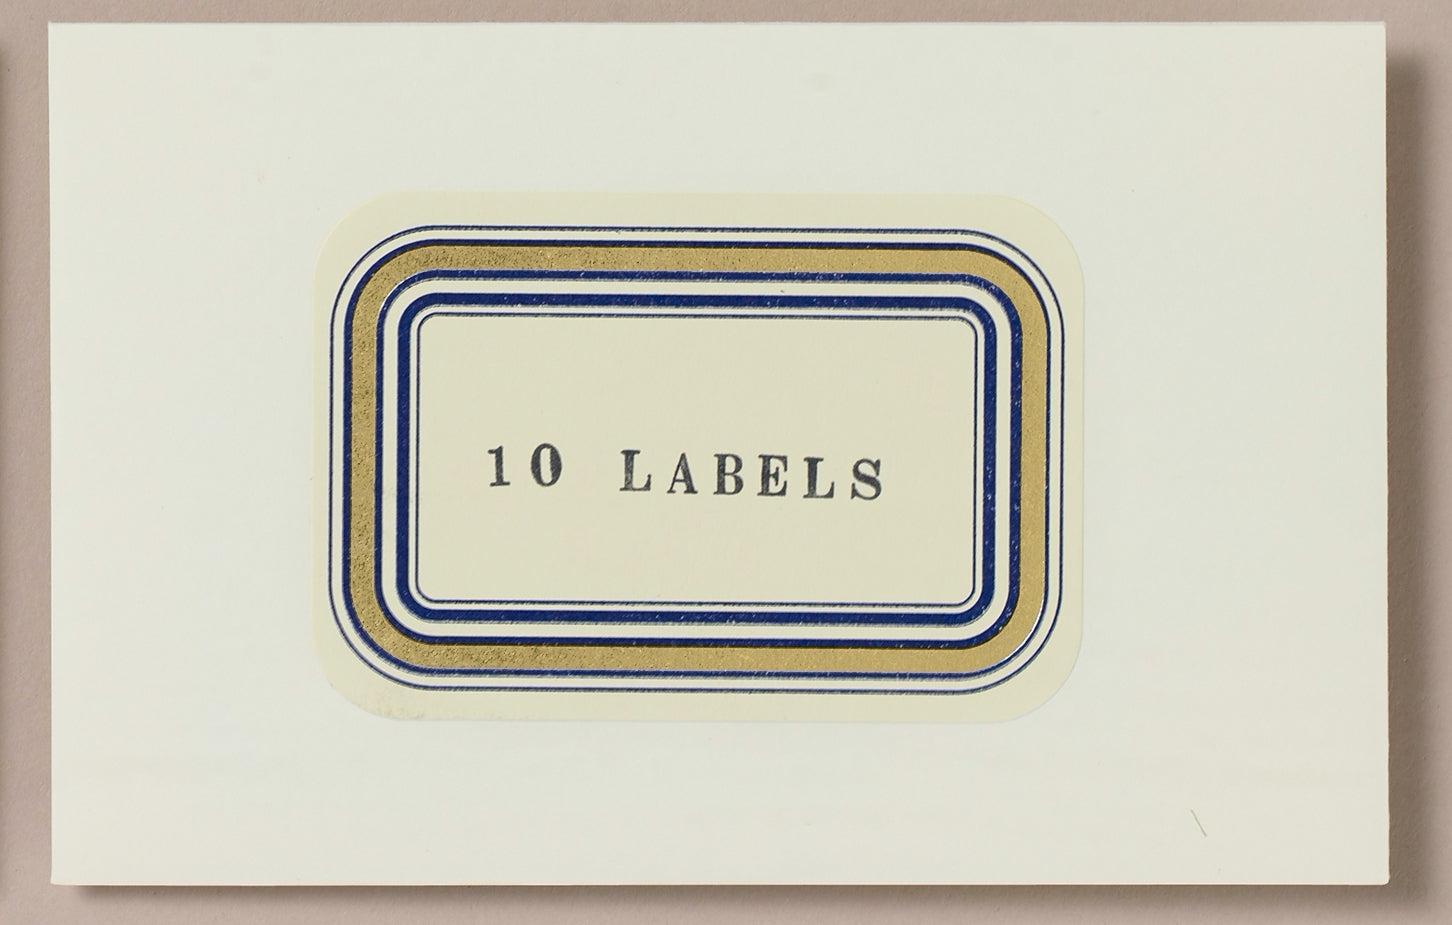 Choosing Keeping Gold Foiled Classic Decorative Labels